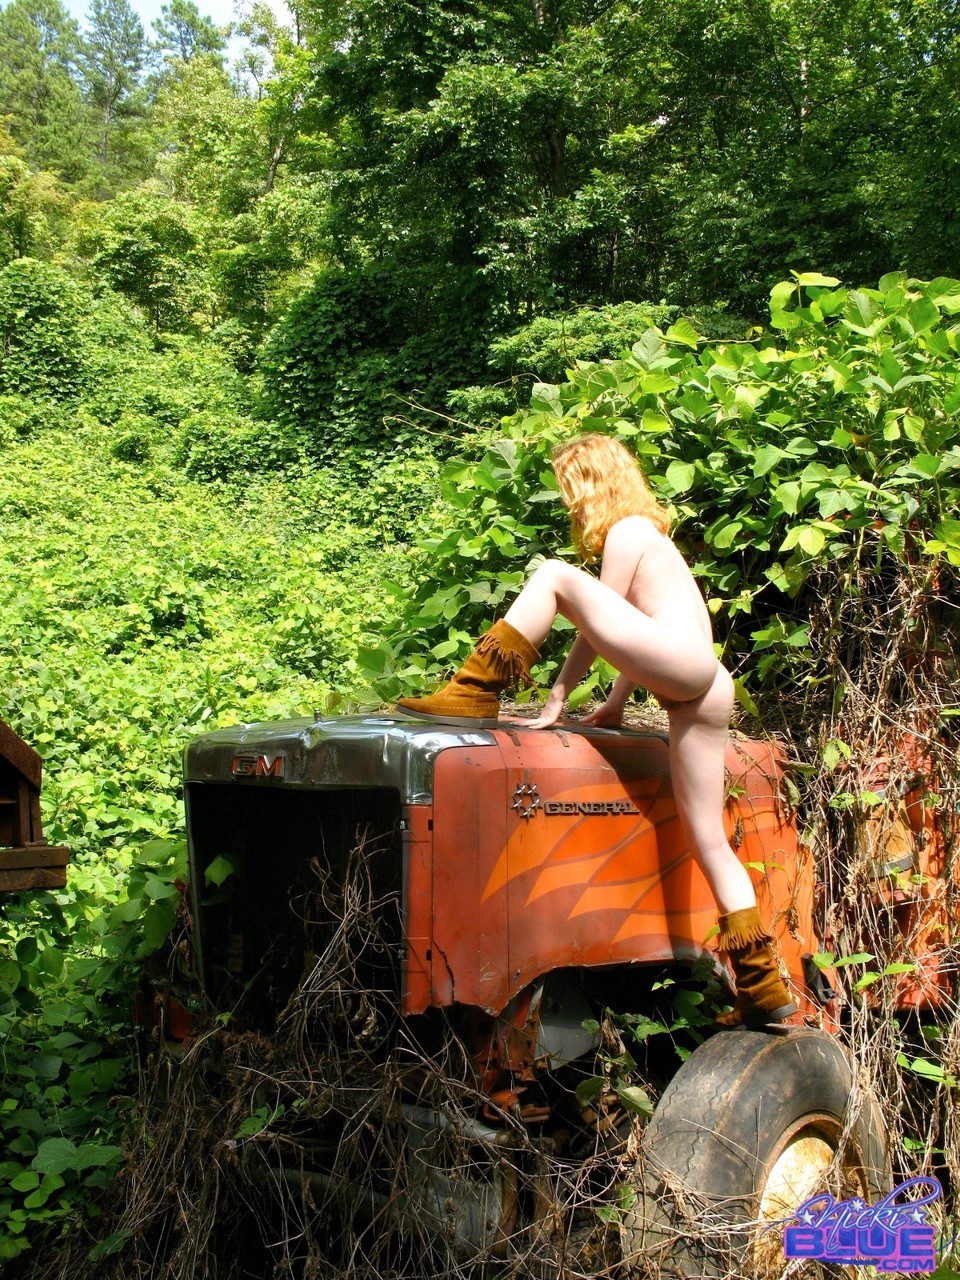 Amateur babe in boots Nicki Blue strips and poses on a tractor in the forest foto porno #424040516 | Pornstar Platinum Pics, Nicki Blue, Outdoor, porno mobile